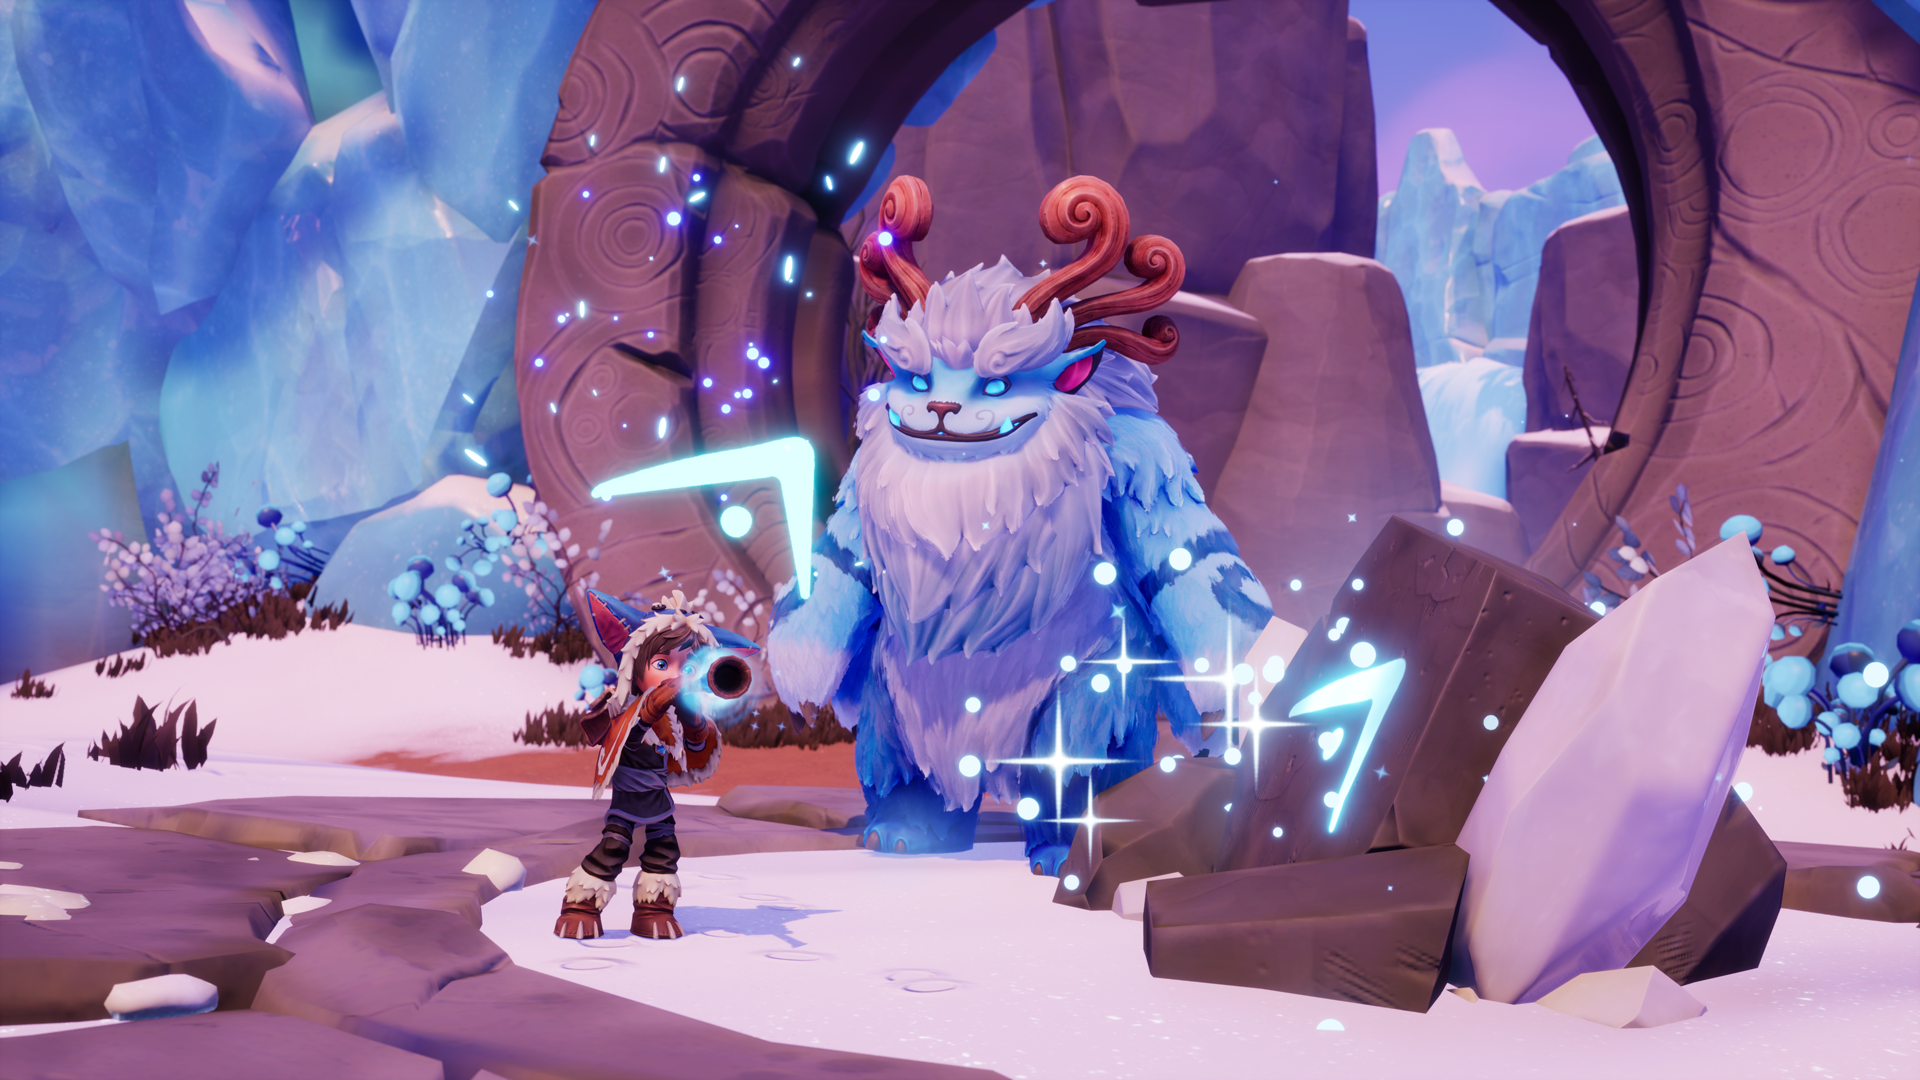 League of Legends spinoff Song of Nunu finally arrives this November